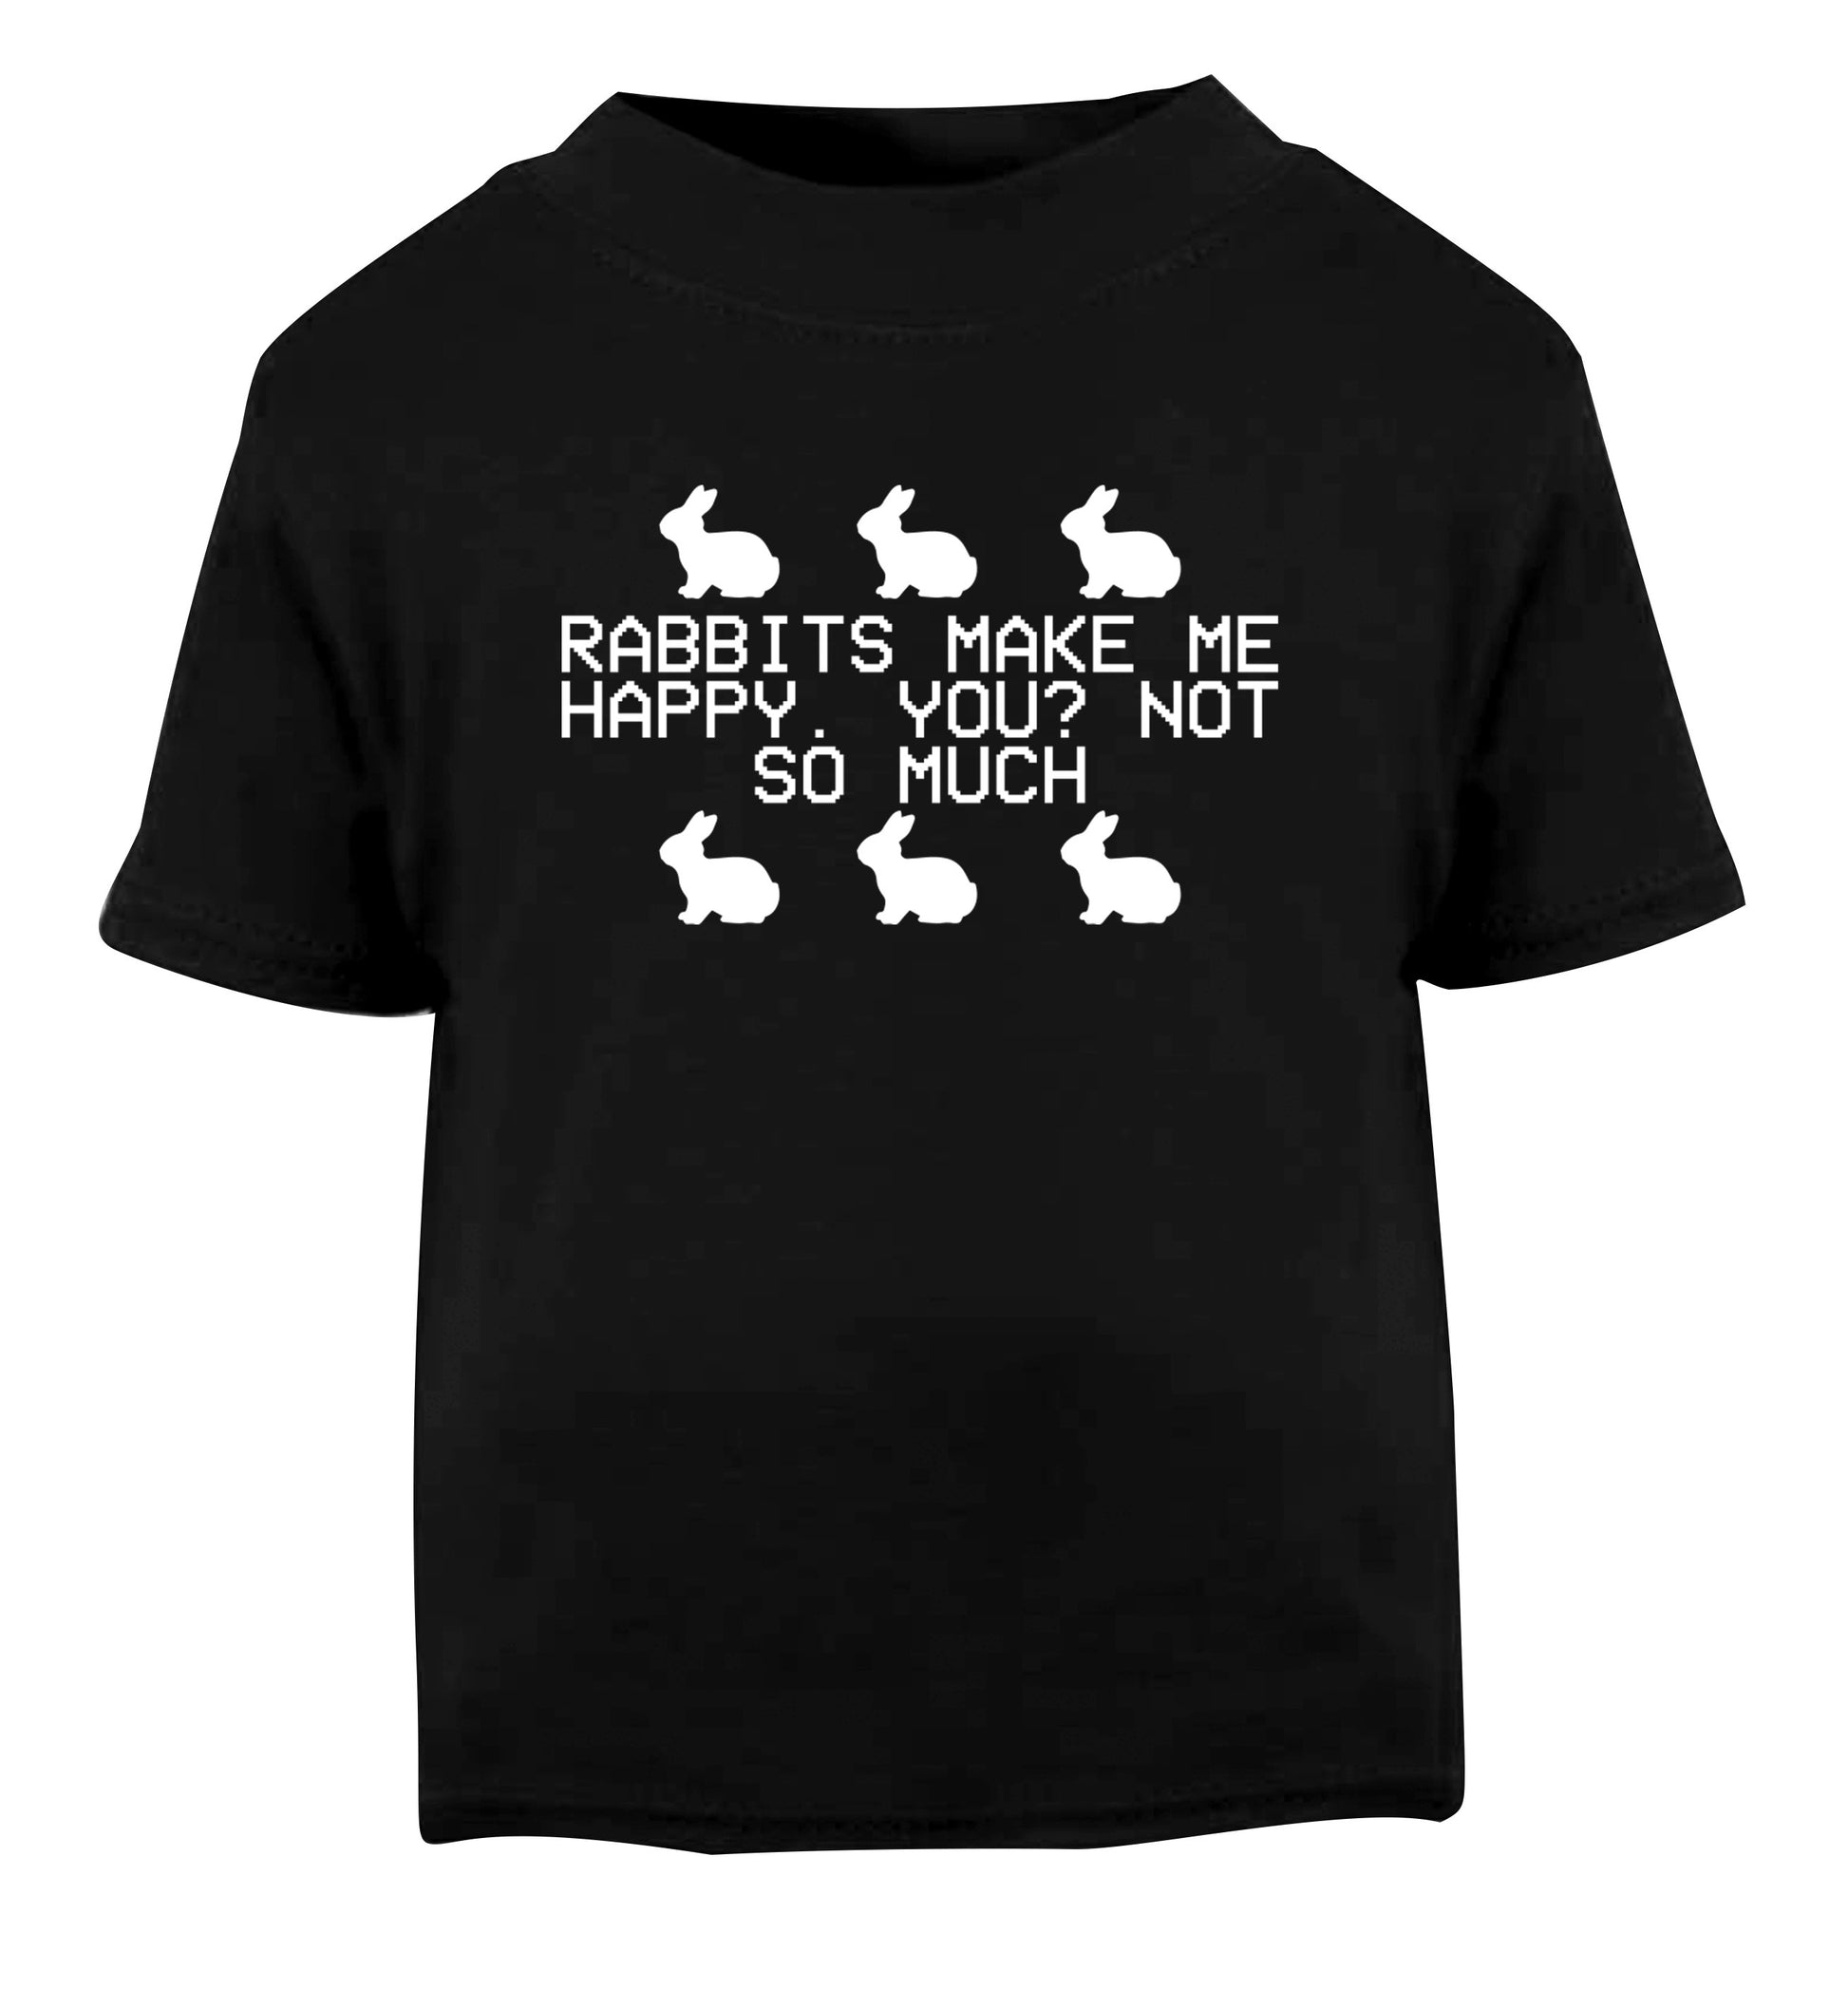 Rabbits make me happy, you not so much Black Baby Toddler Tshirt 2 years